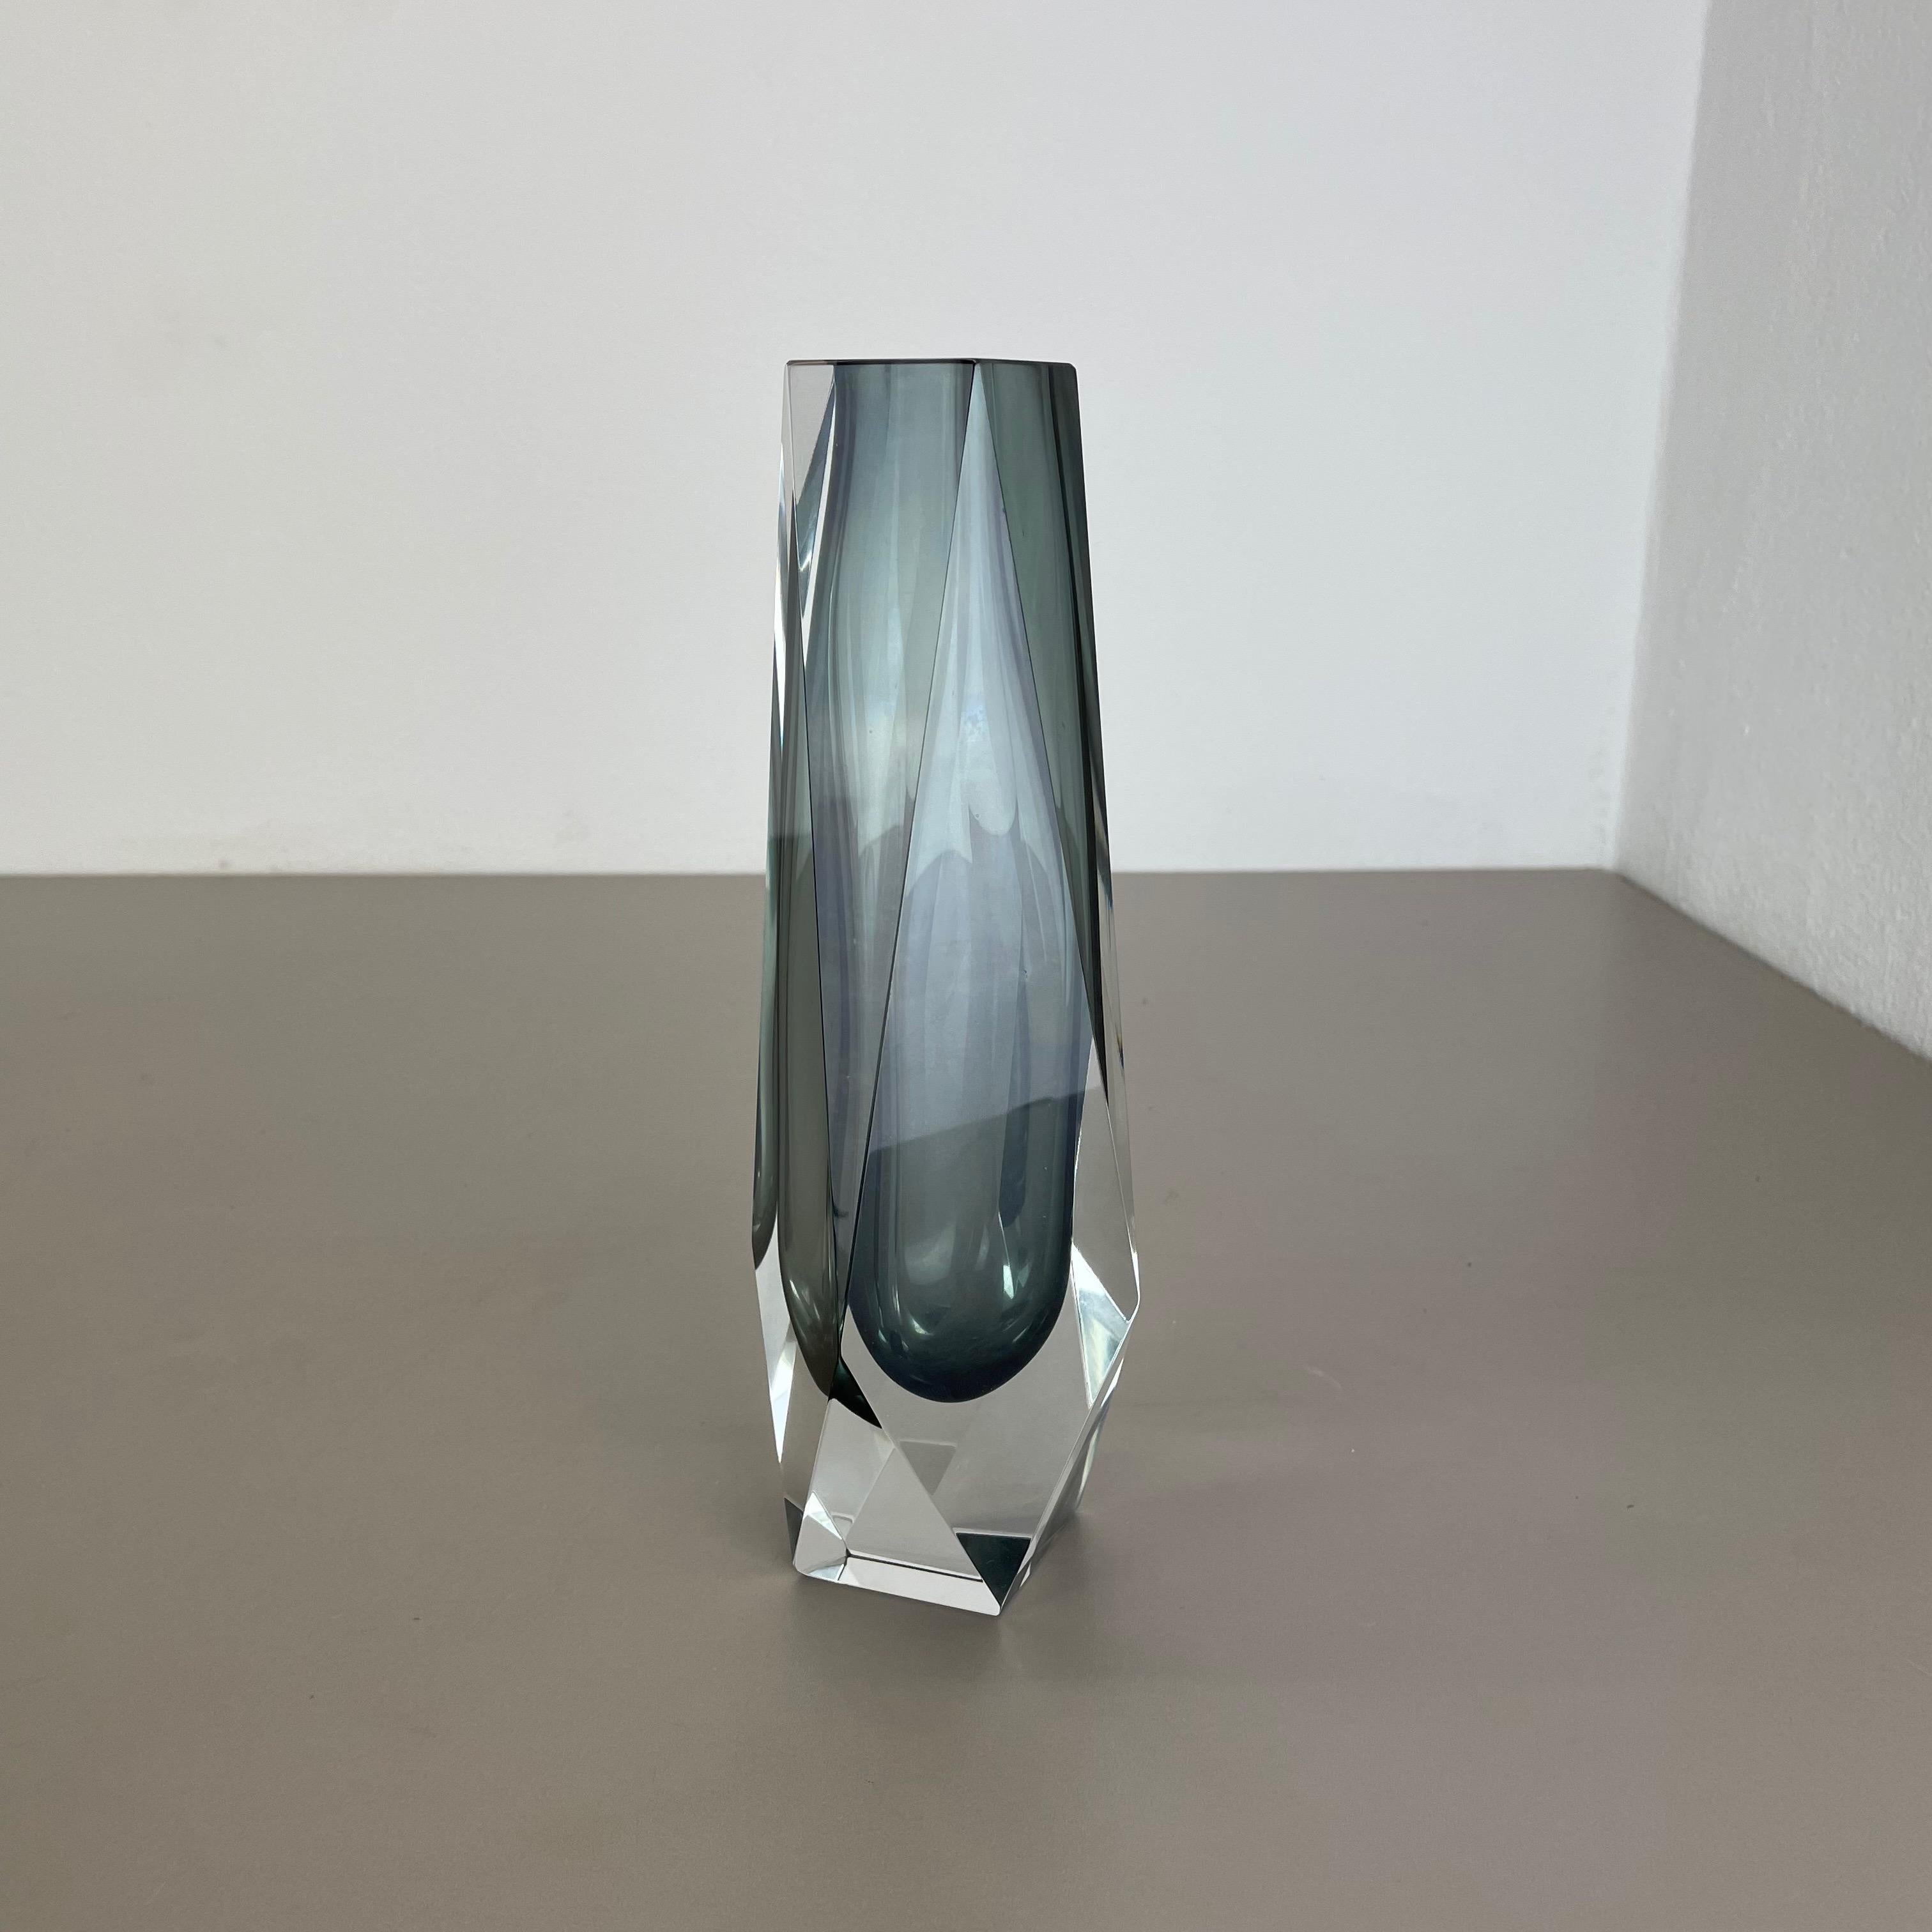 Italian Large 25cm Grey Murano Glass Sommerso Vase by Flavio Poli Attributed, Italy 1970 For Sale